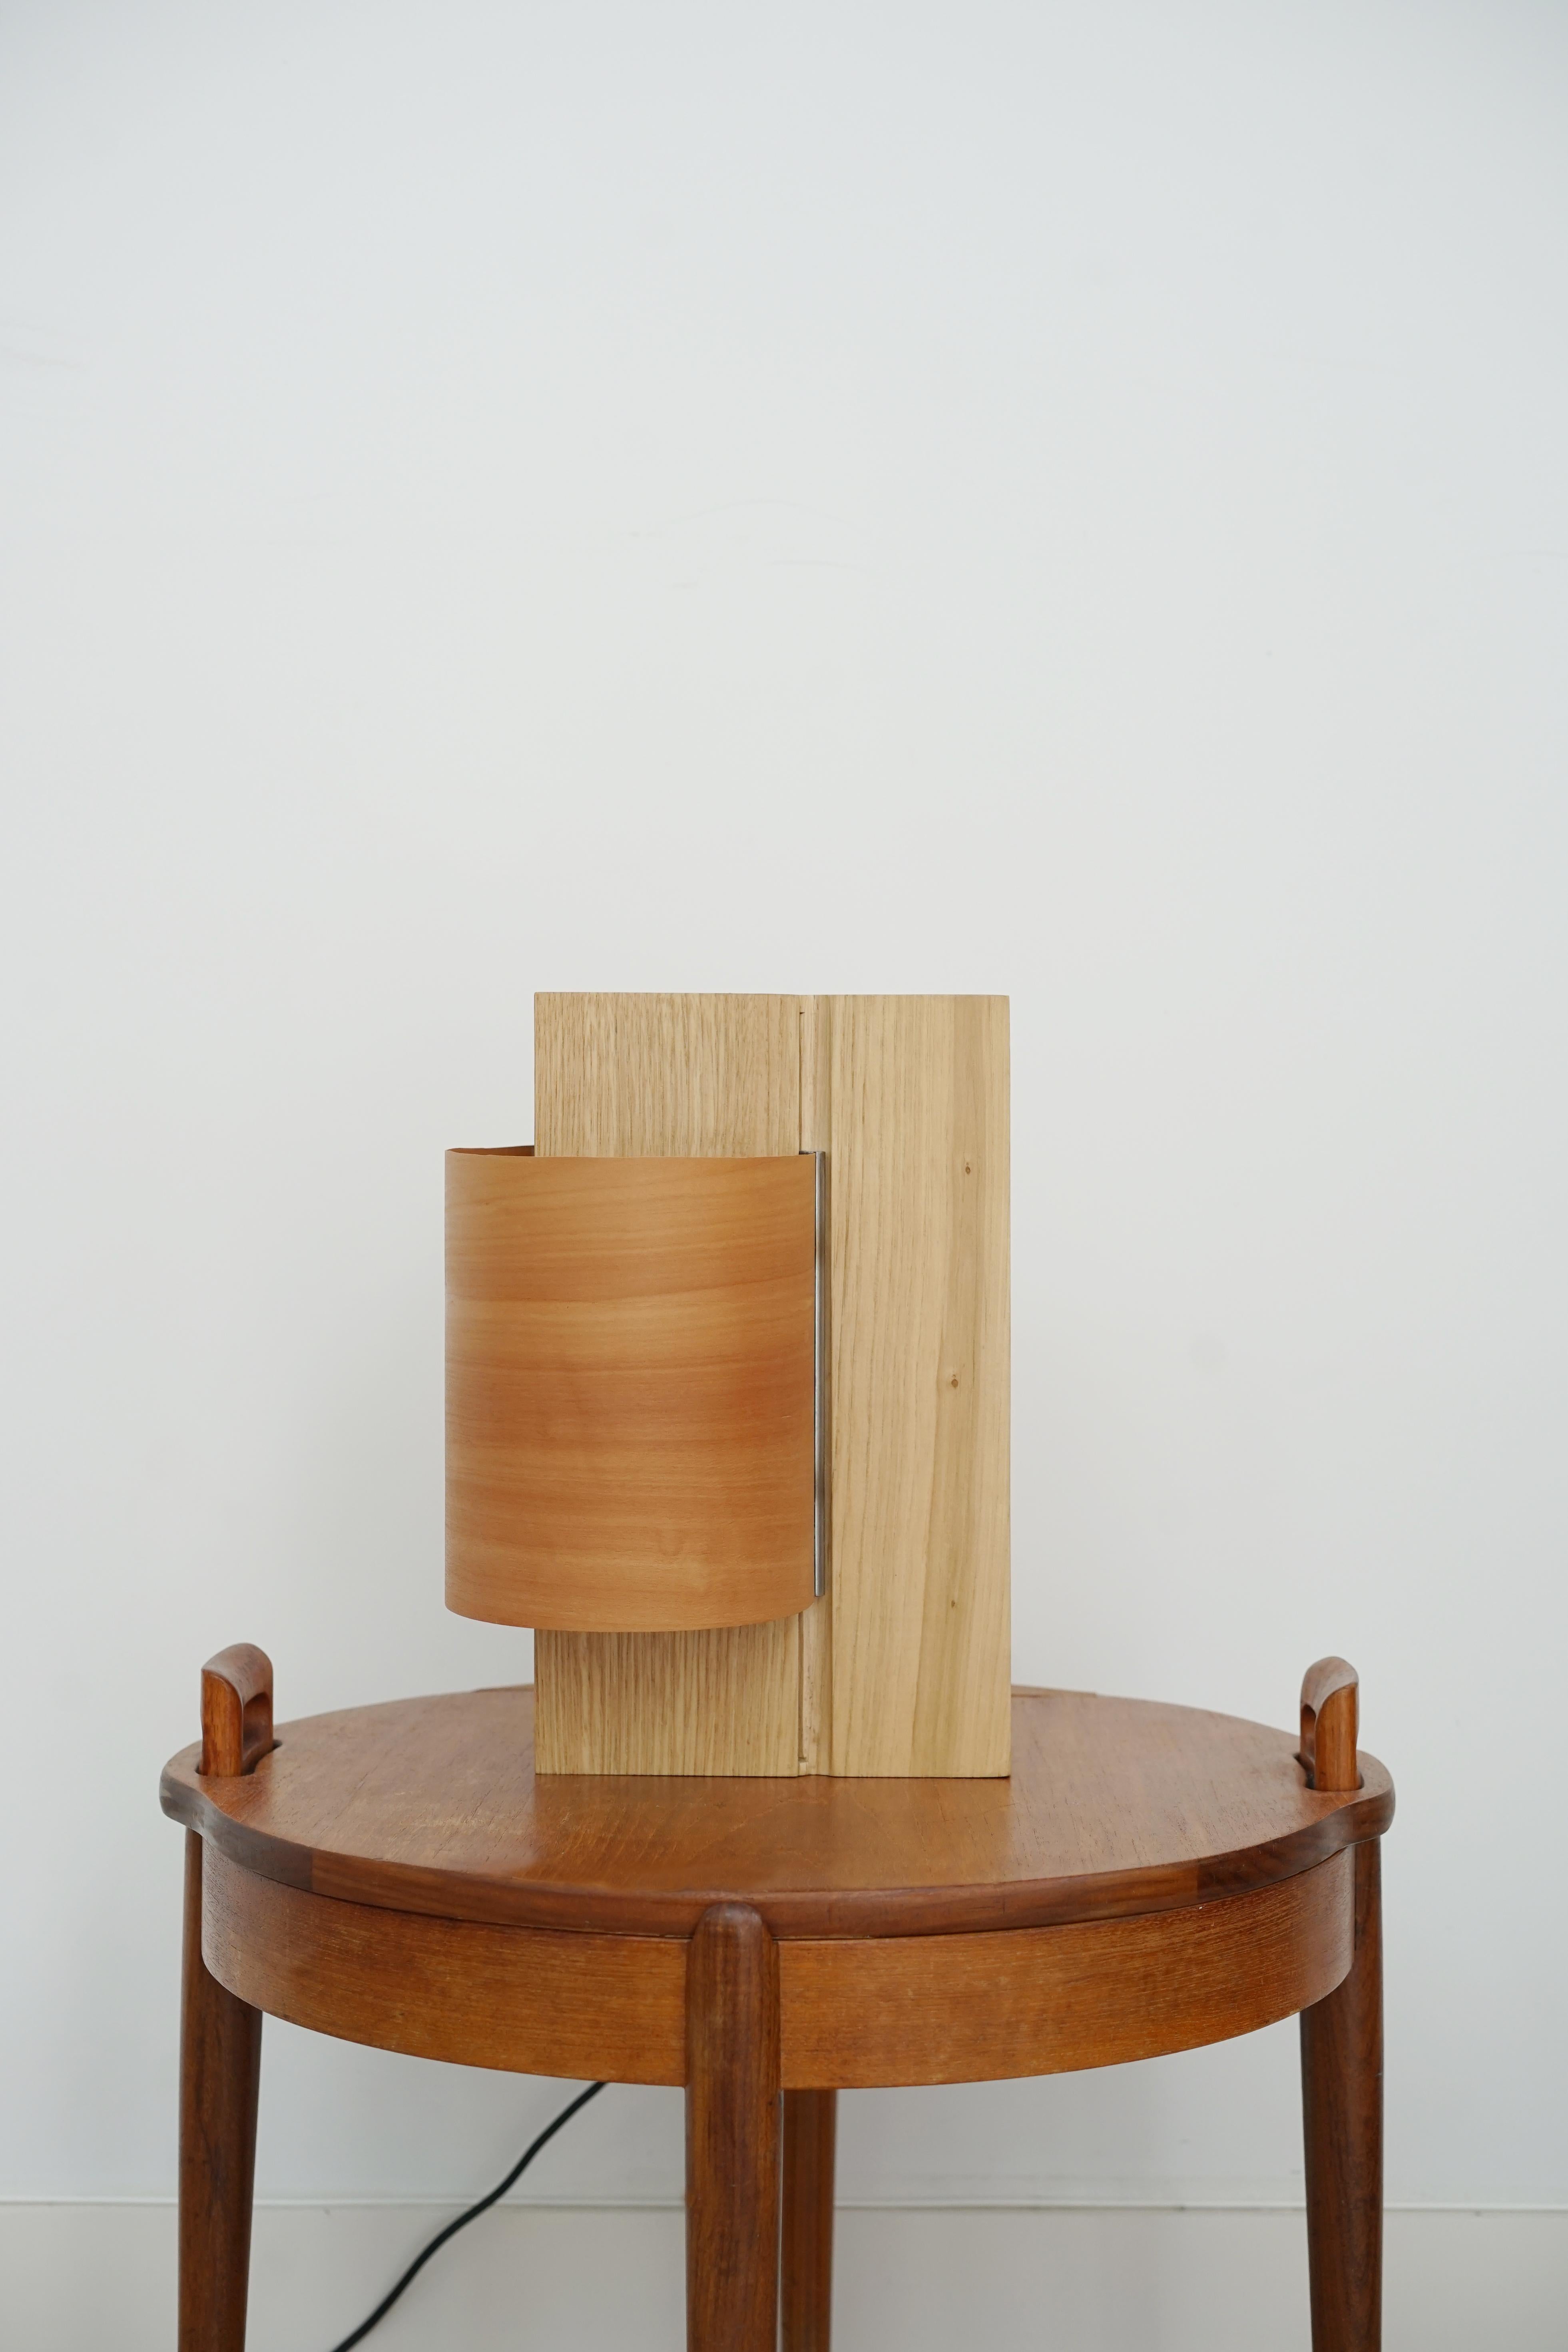 Table Lamp 6/10, Oak and Pear Wood, Handmade in France, OROS Edition For Sale 2